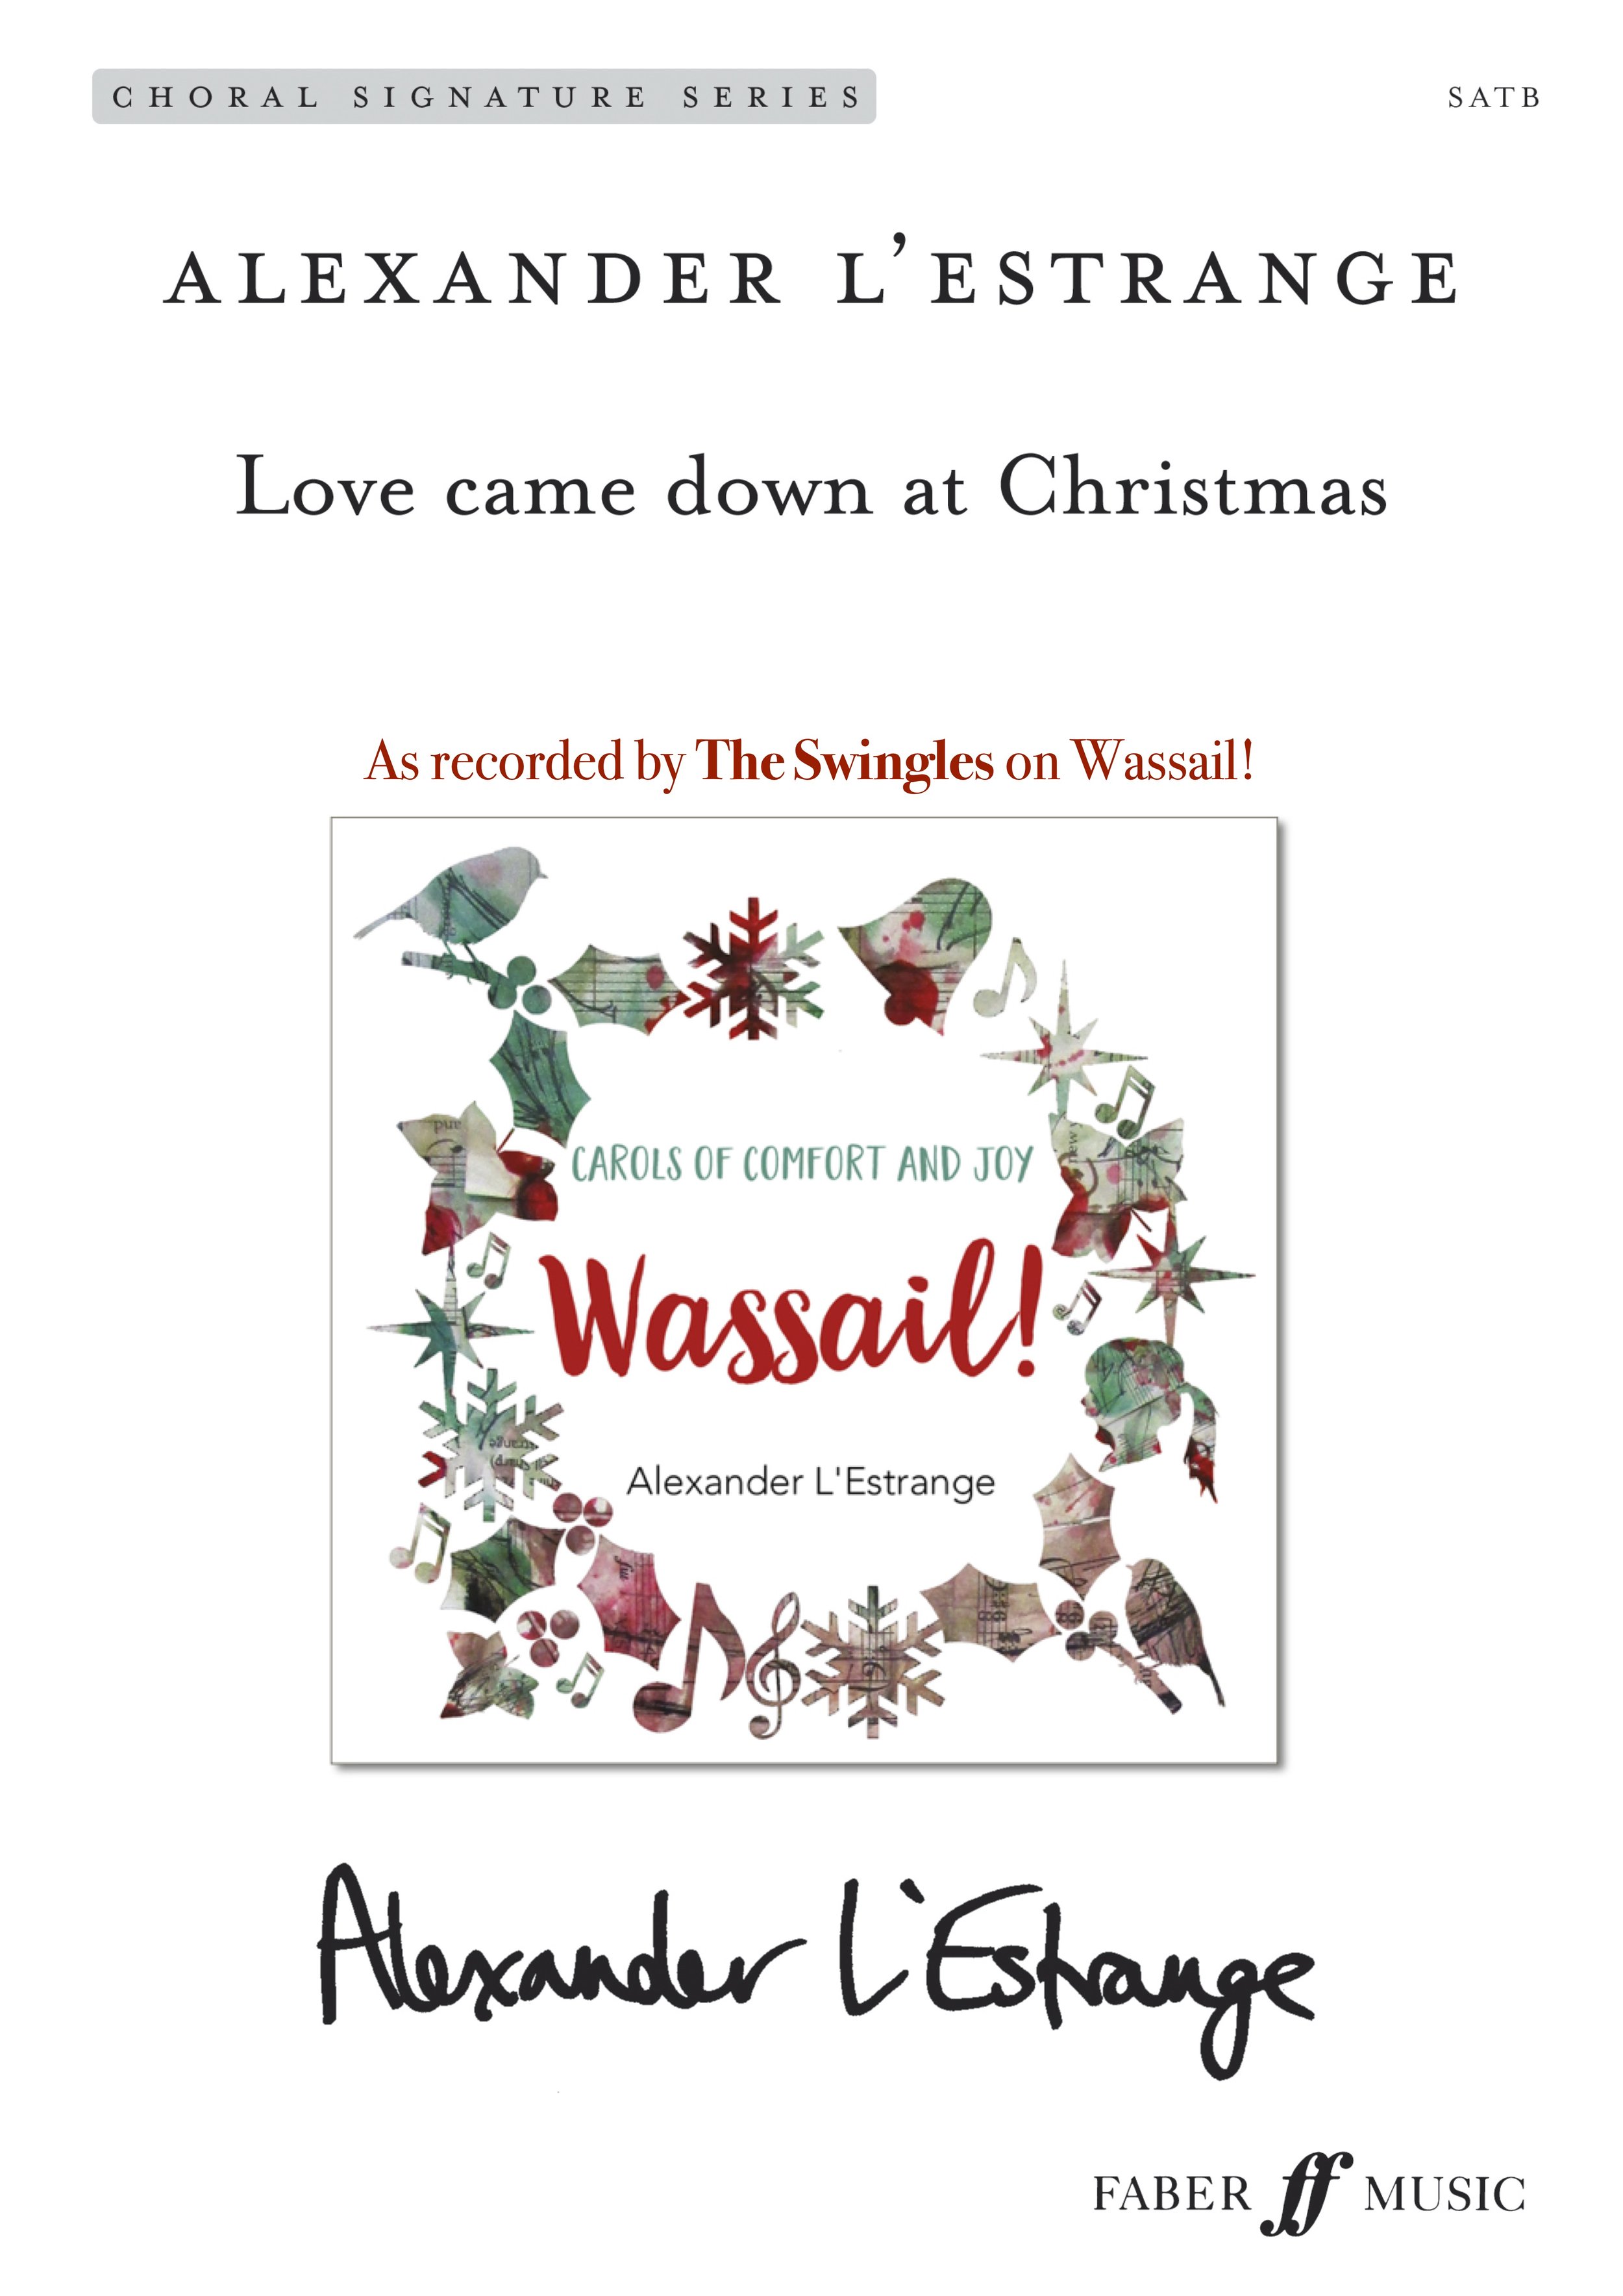 Love came down at Christmas NEW COVER.jpg